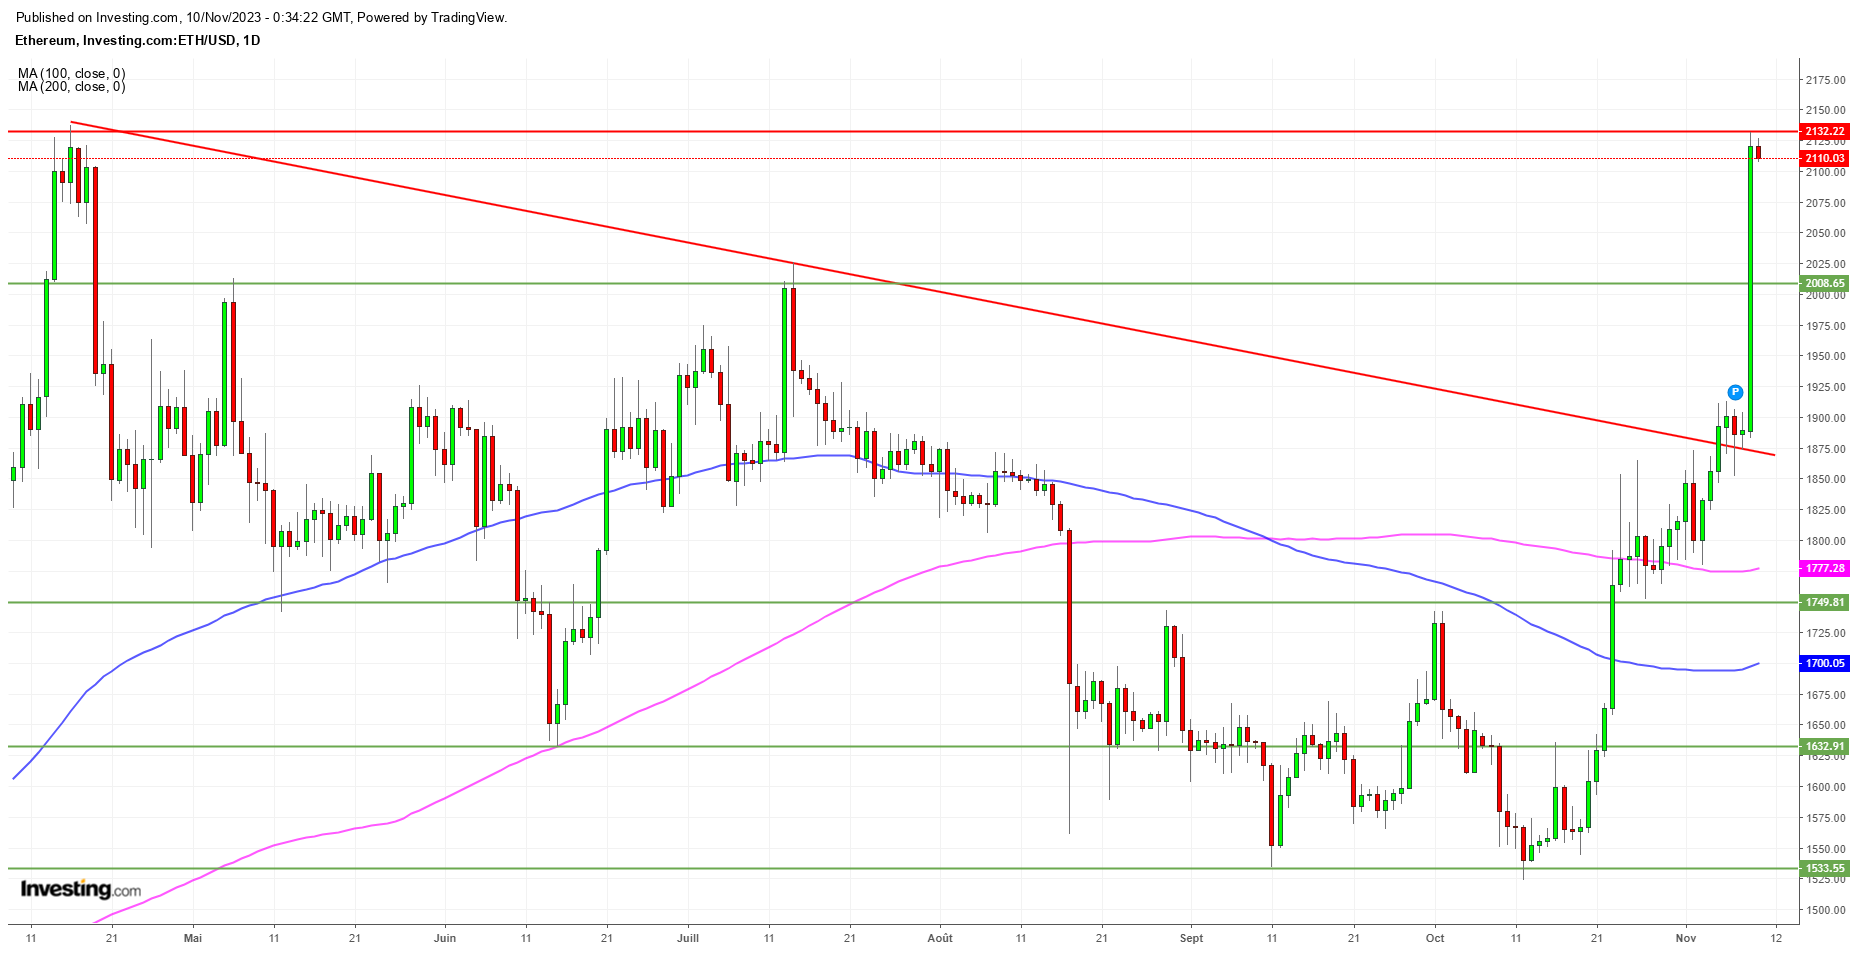 Ethereum – Daily Chart